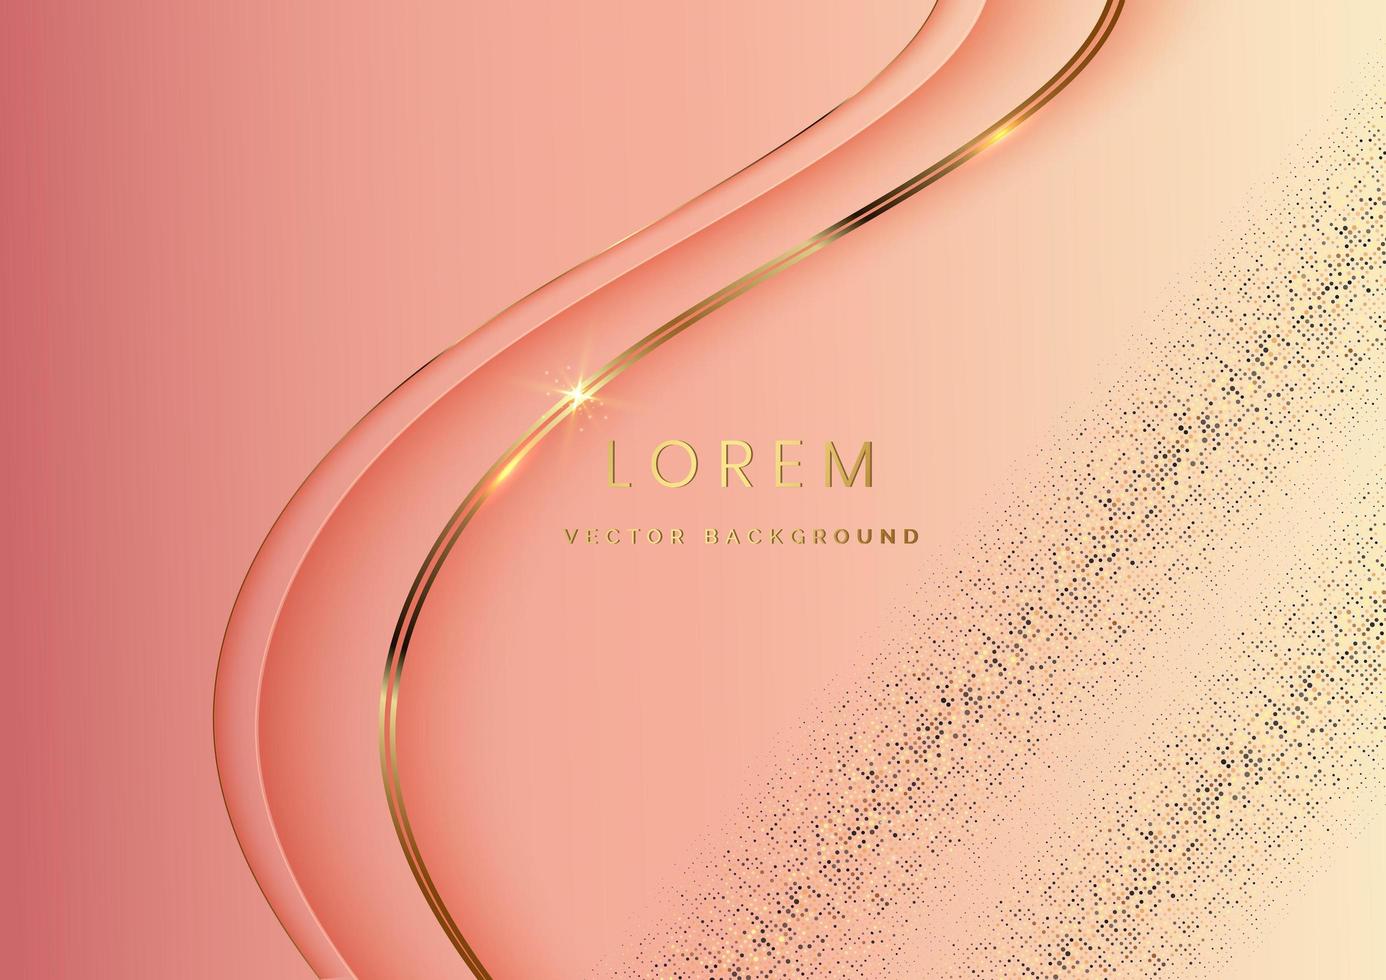 Abstract 3d gold and soft pink curved layers background with lighting effect and sparkle with copy space for text. Luxury design style. vector